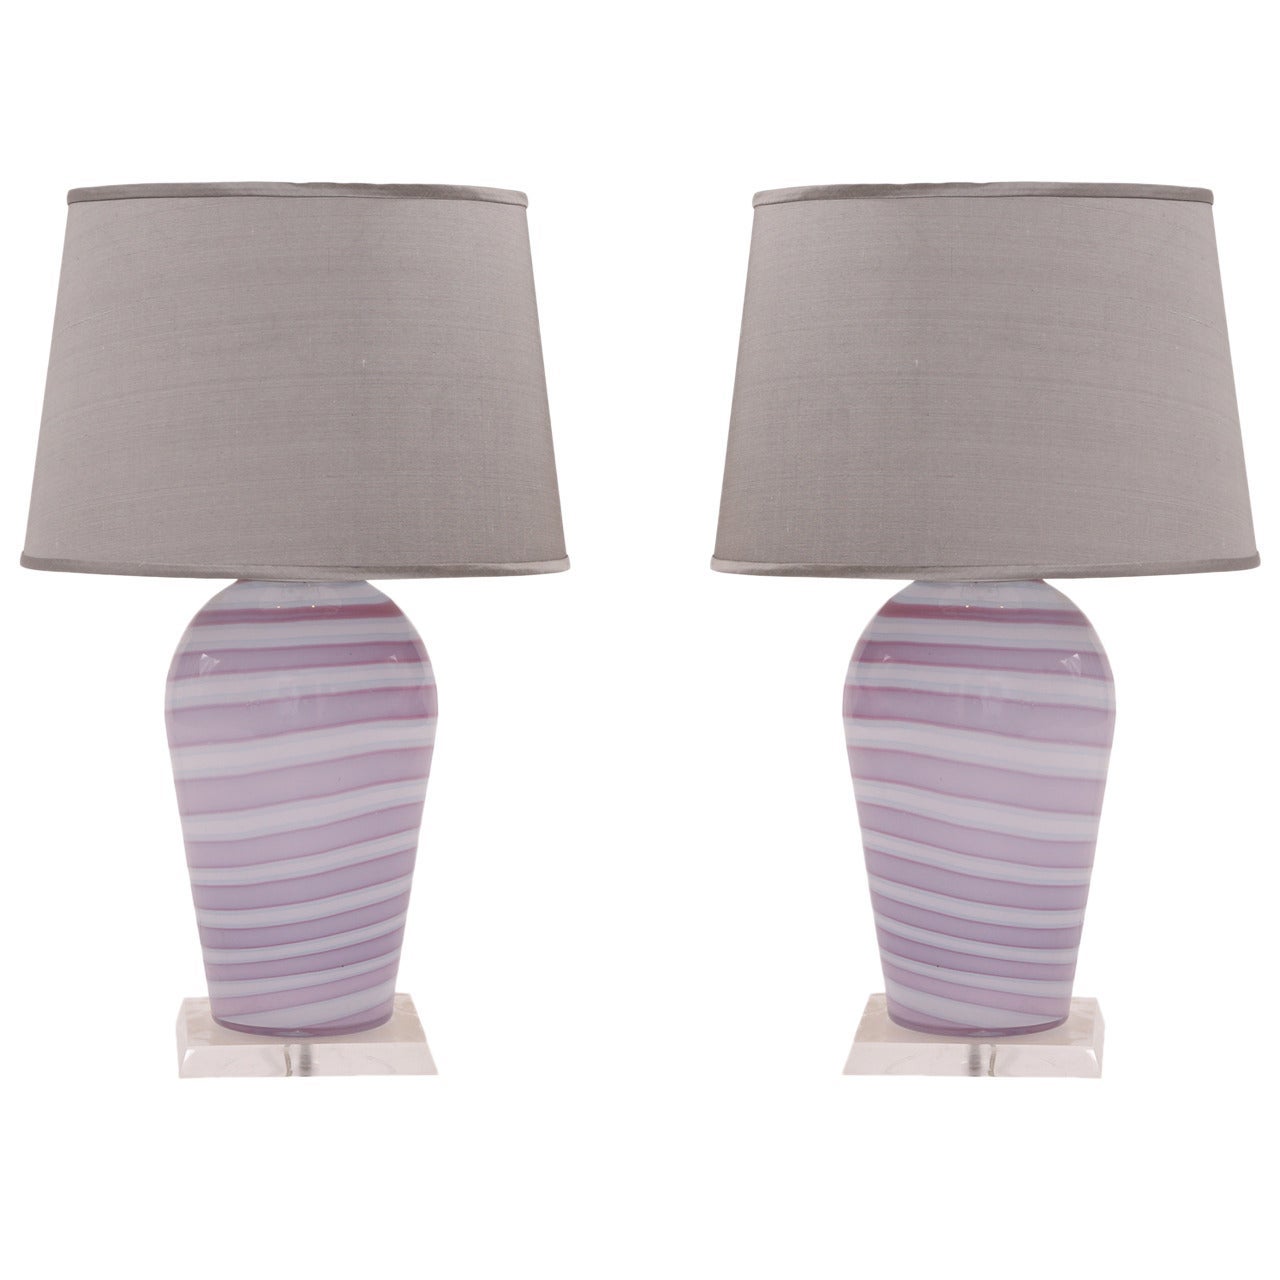 Striped Italian Murano Glass Table Lamps, 1970's For Sale